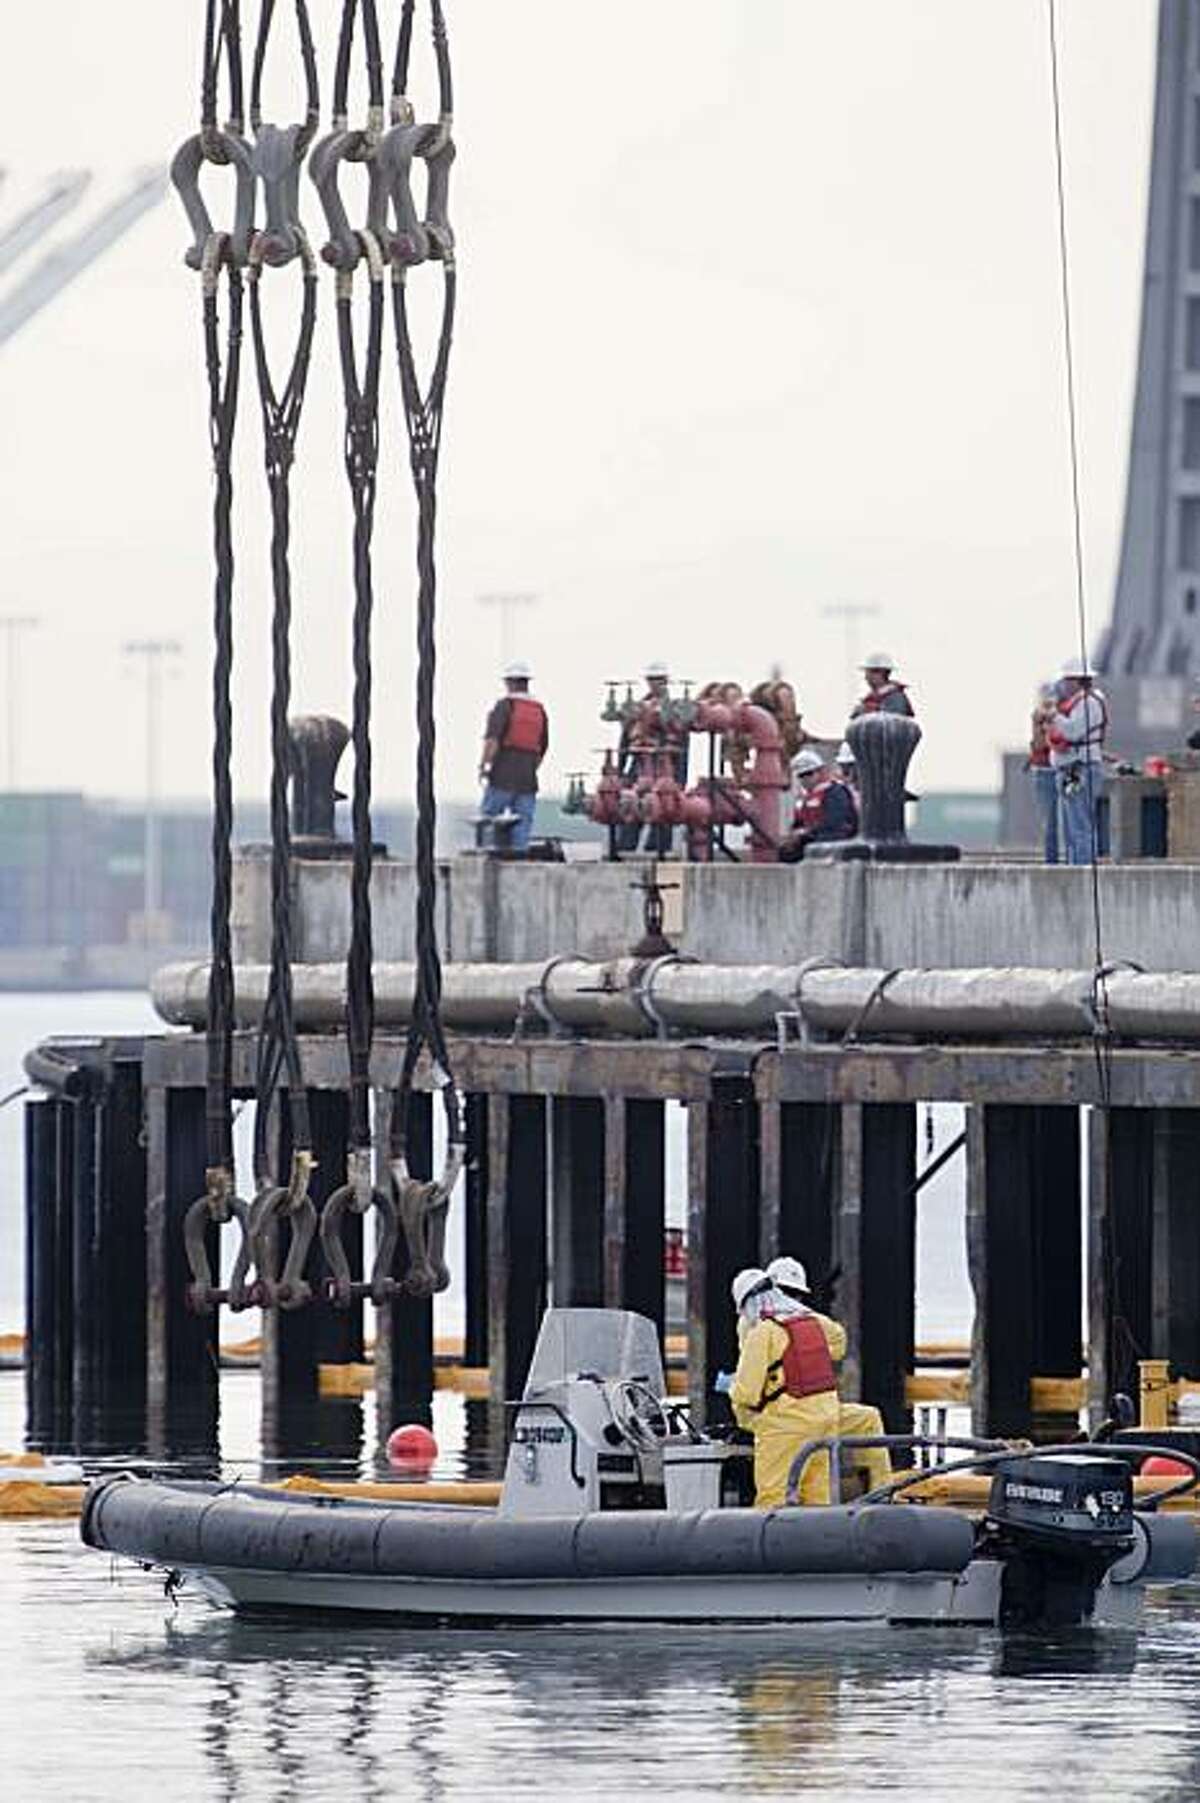 A recovery crew works to lower cables used to salvage the sunken U.S.S Wenonah.